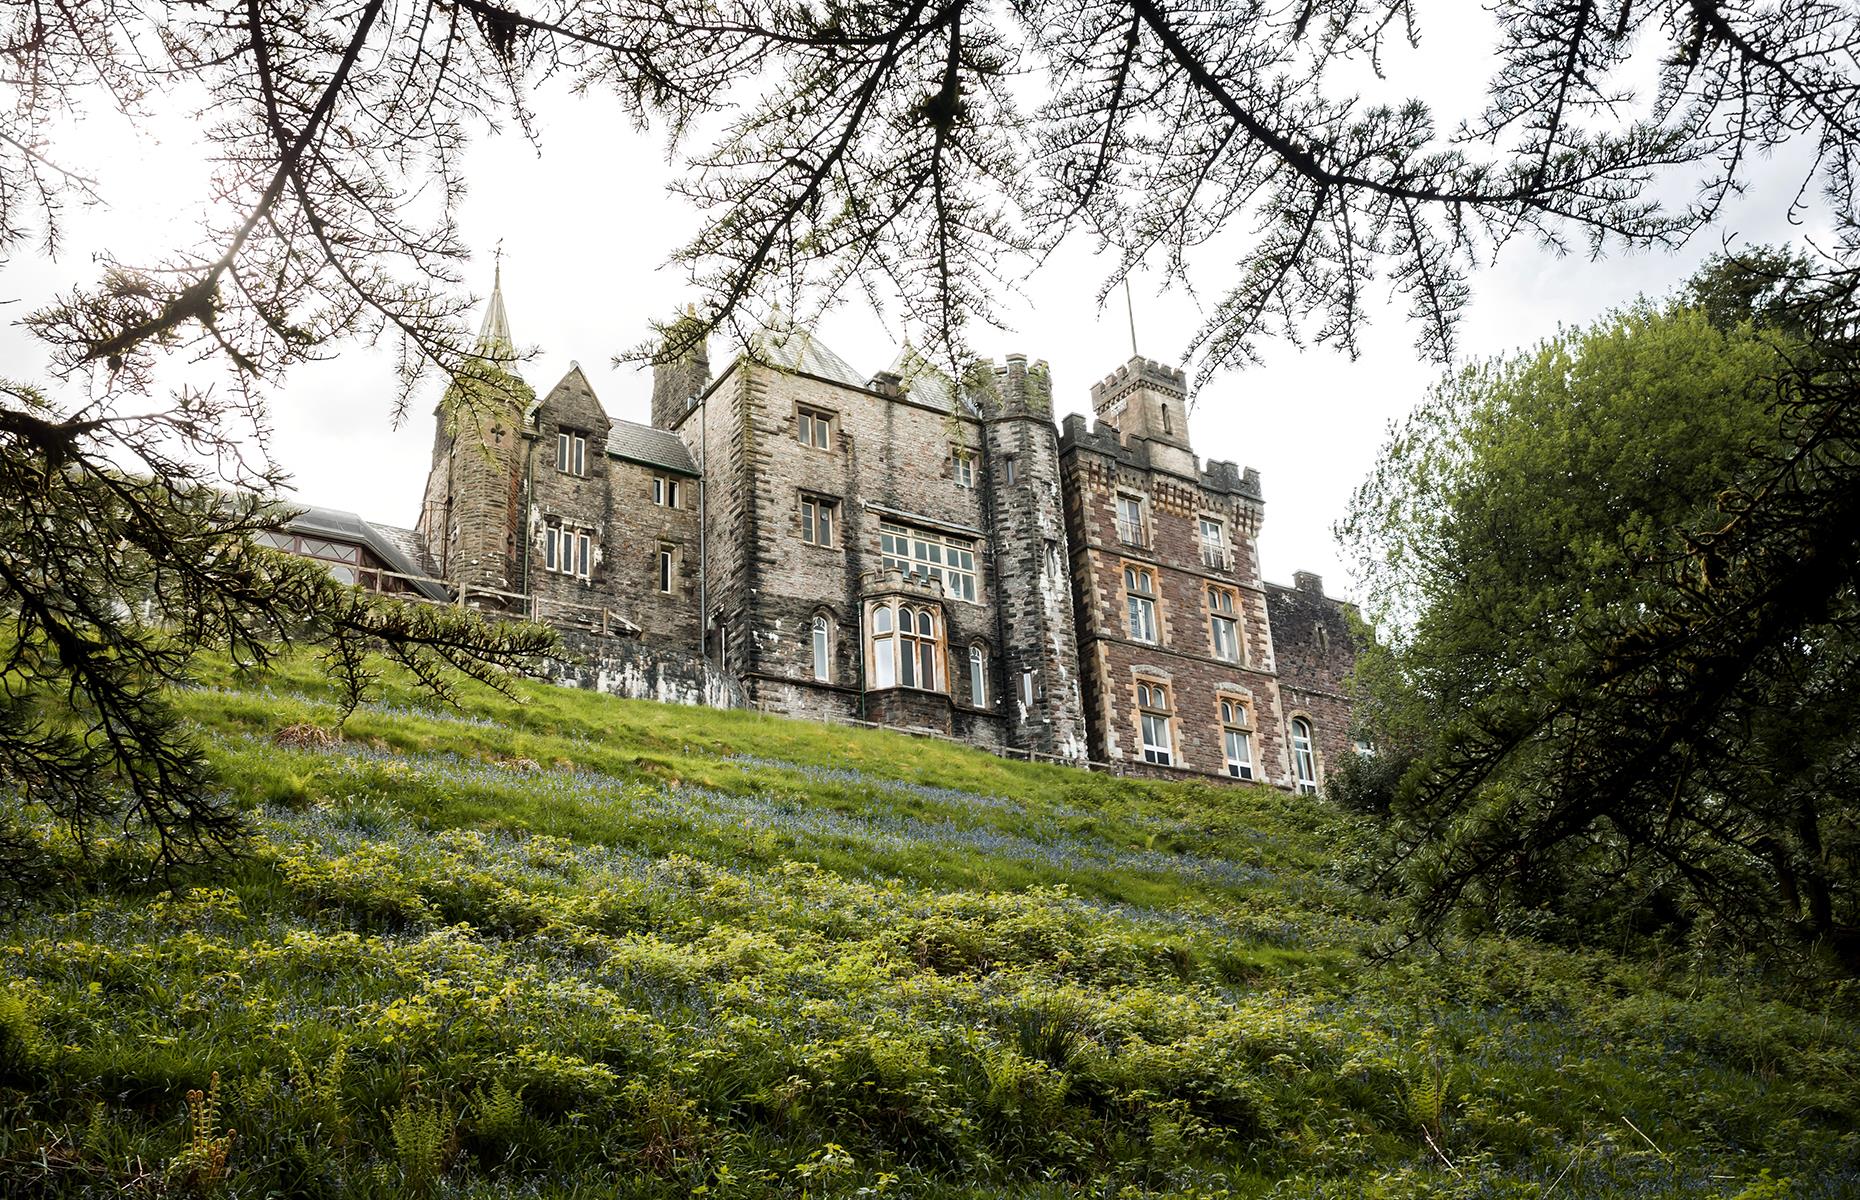 <p>Now a fairy tale-esque wedding venue and hotel, <a href="https://www.craigynoscastle.com/">Craig y Nos Castle</a> stands in the midst of Brecon Beacons National Park and was once the home of Adelina Patti, a famed Italian opera singer. One of the finest spots on the estate is the Patti Theatre, a Grade I-listed building with ornate Corinthian columns, and it's here that the ghost of a lady in black has purportedly been spotted. Ghost tours and private paranormal investigations are available at the haunting site.</p>